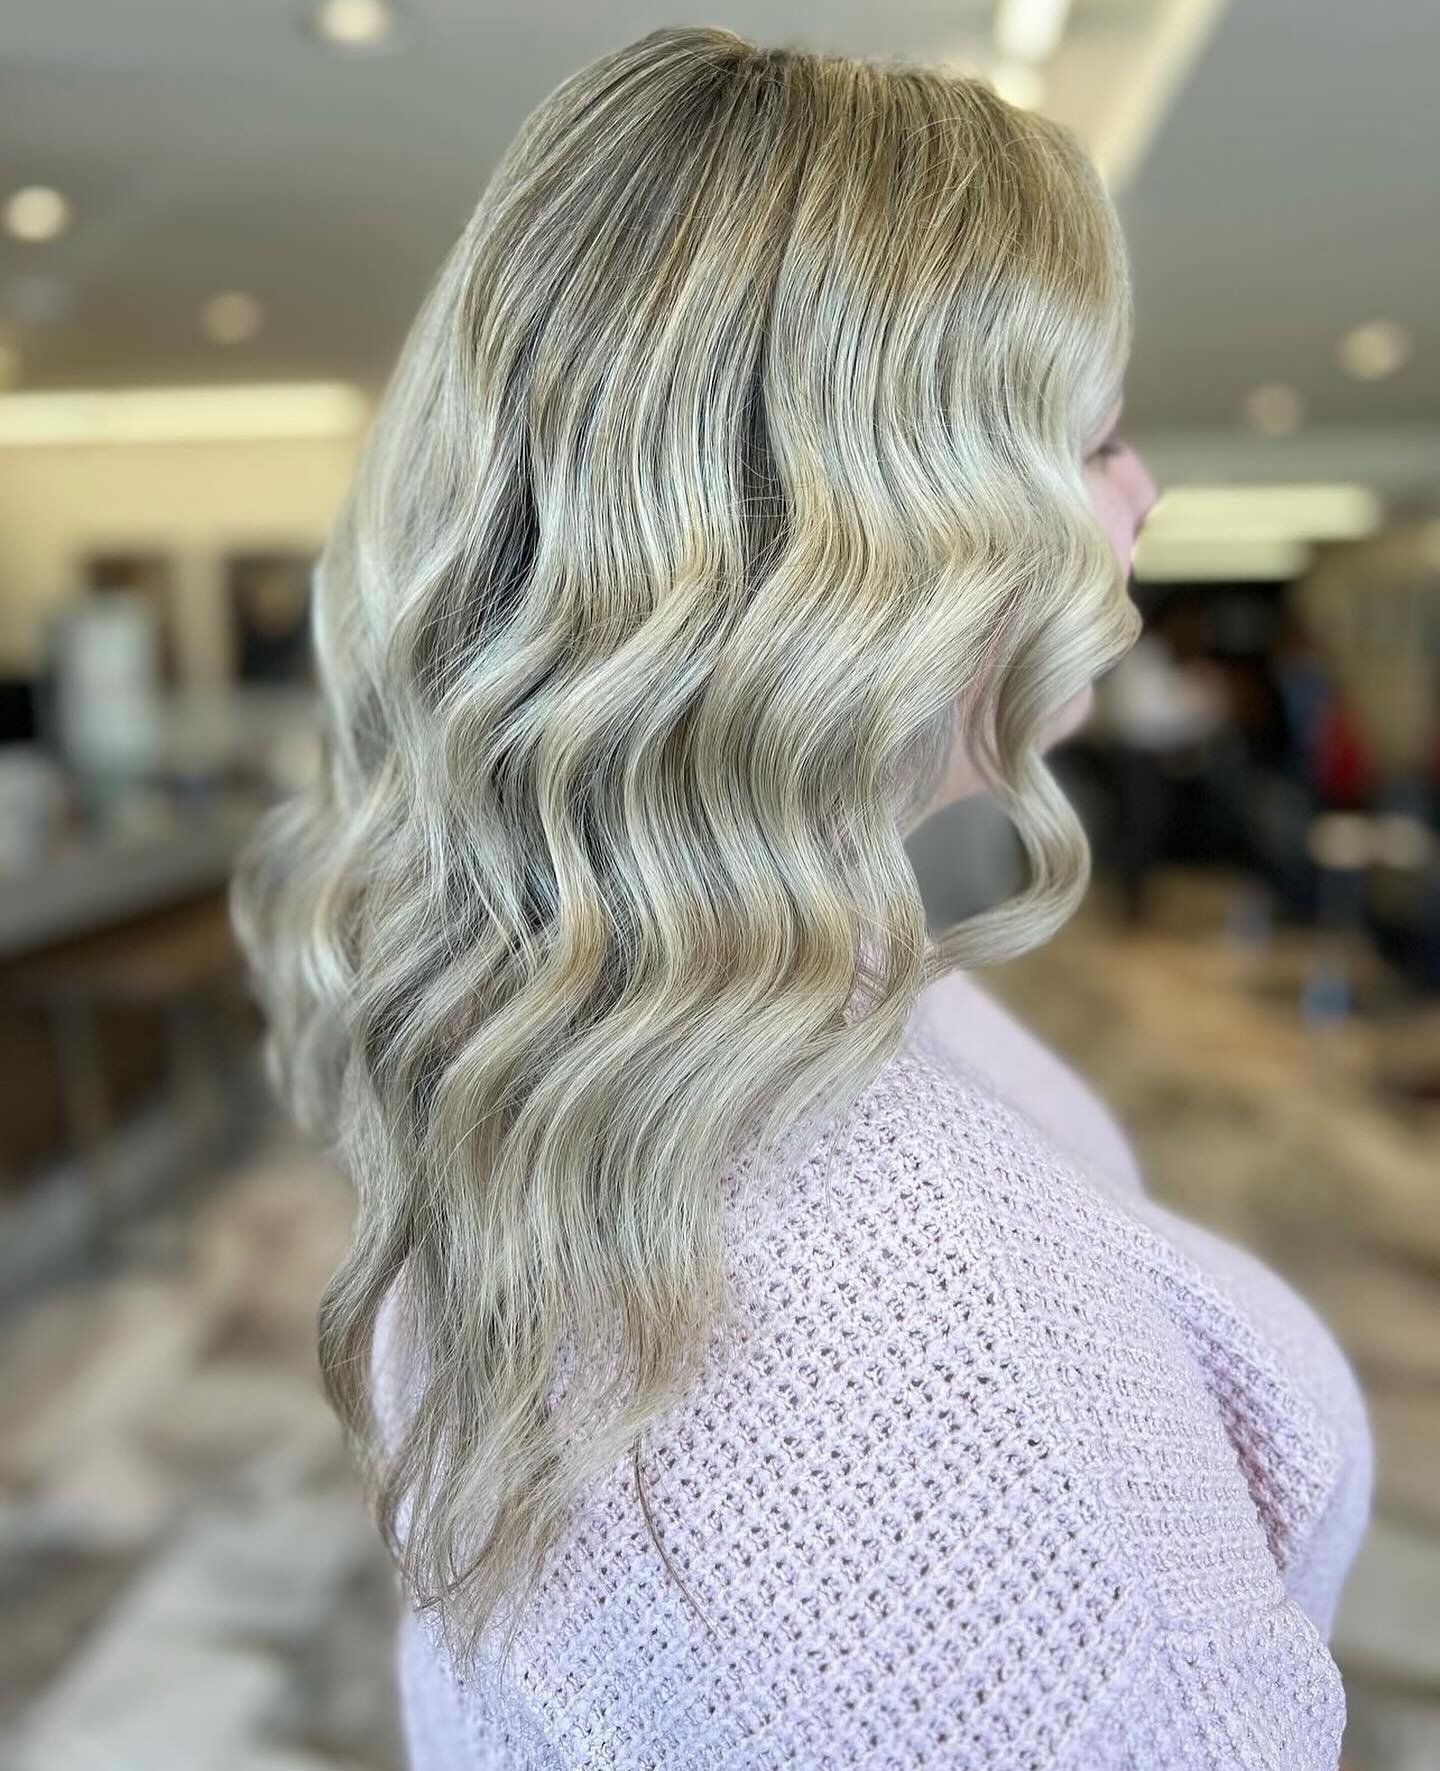 Here&rsquo;s to hoping the brighter the hair, the brighter the days will be 
Hair by @hairby.kayywaters 
.
.
.
@goldwellca #goldwellca
#behindthechair #licensedtocreate #niagarahair #niagarahairstylist #oneshot
#modernsalon #goldwellapprovedus #salon